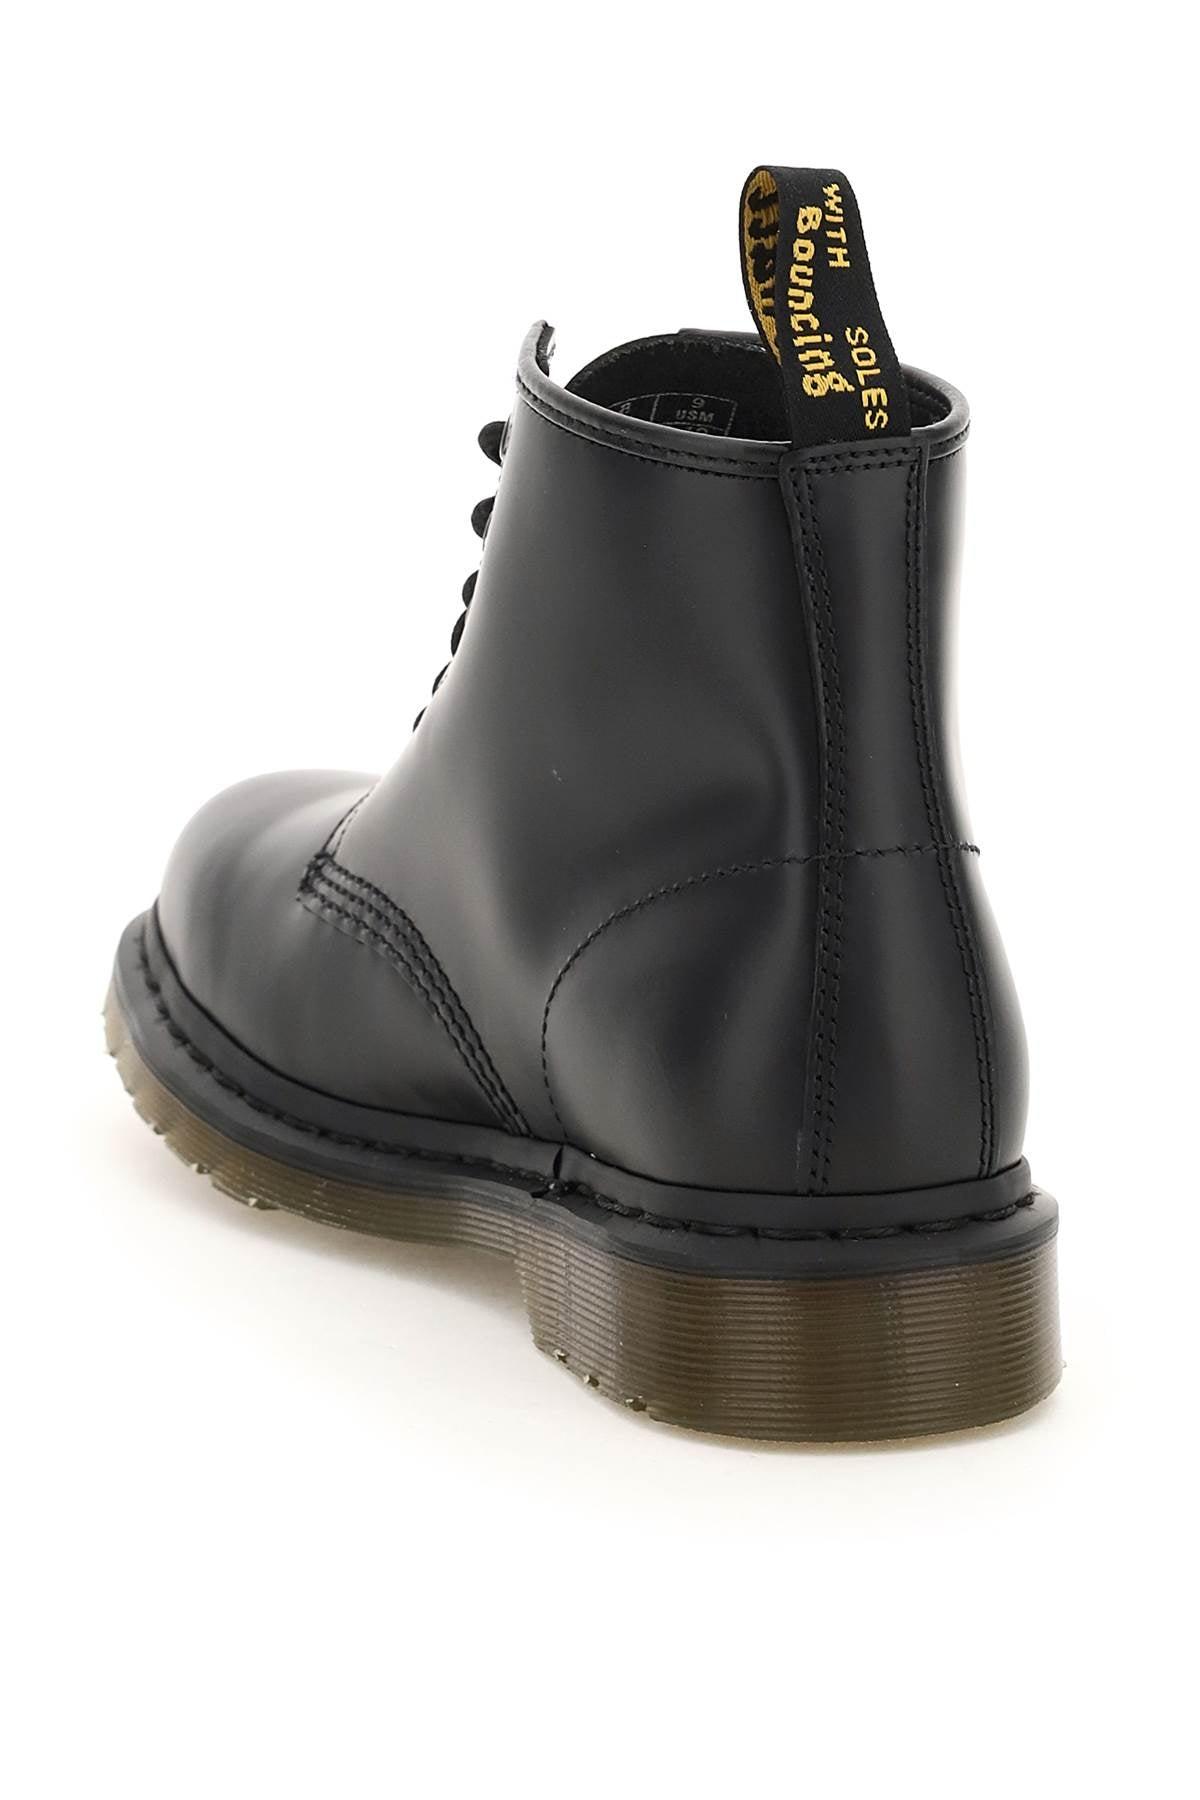 Dr. Martens Leather Dr.martens 101 Smooth Lace-up Combat Boots in Black for  Men - Save 41% | Lyst